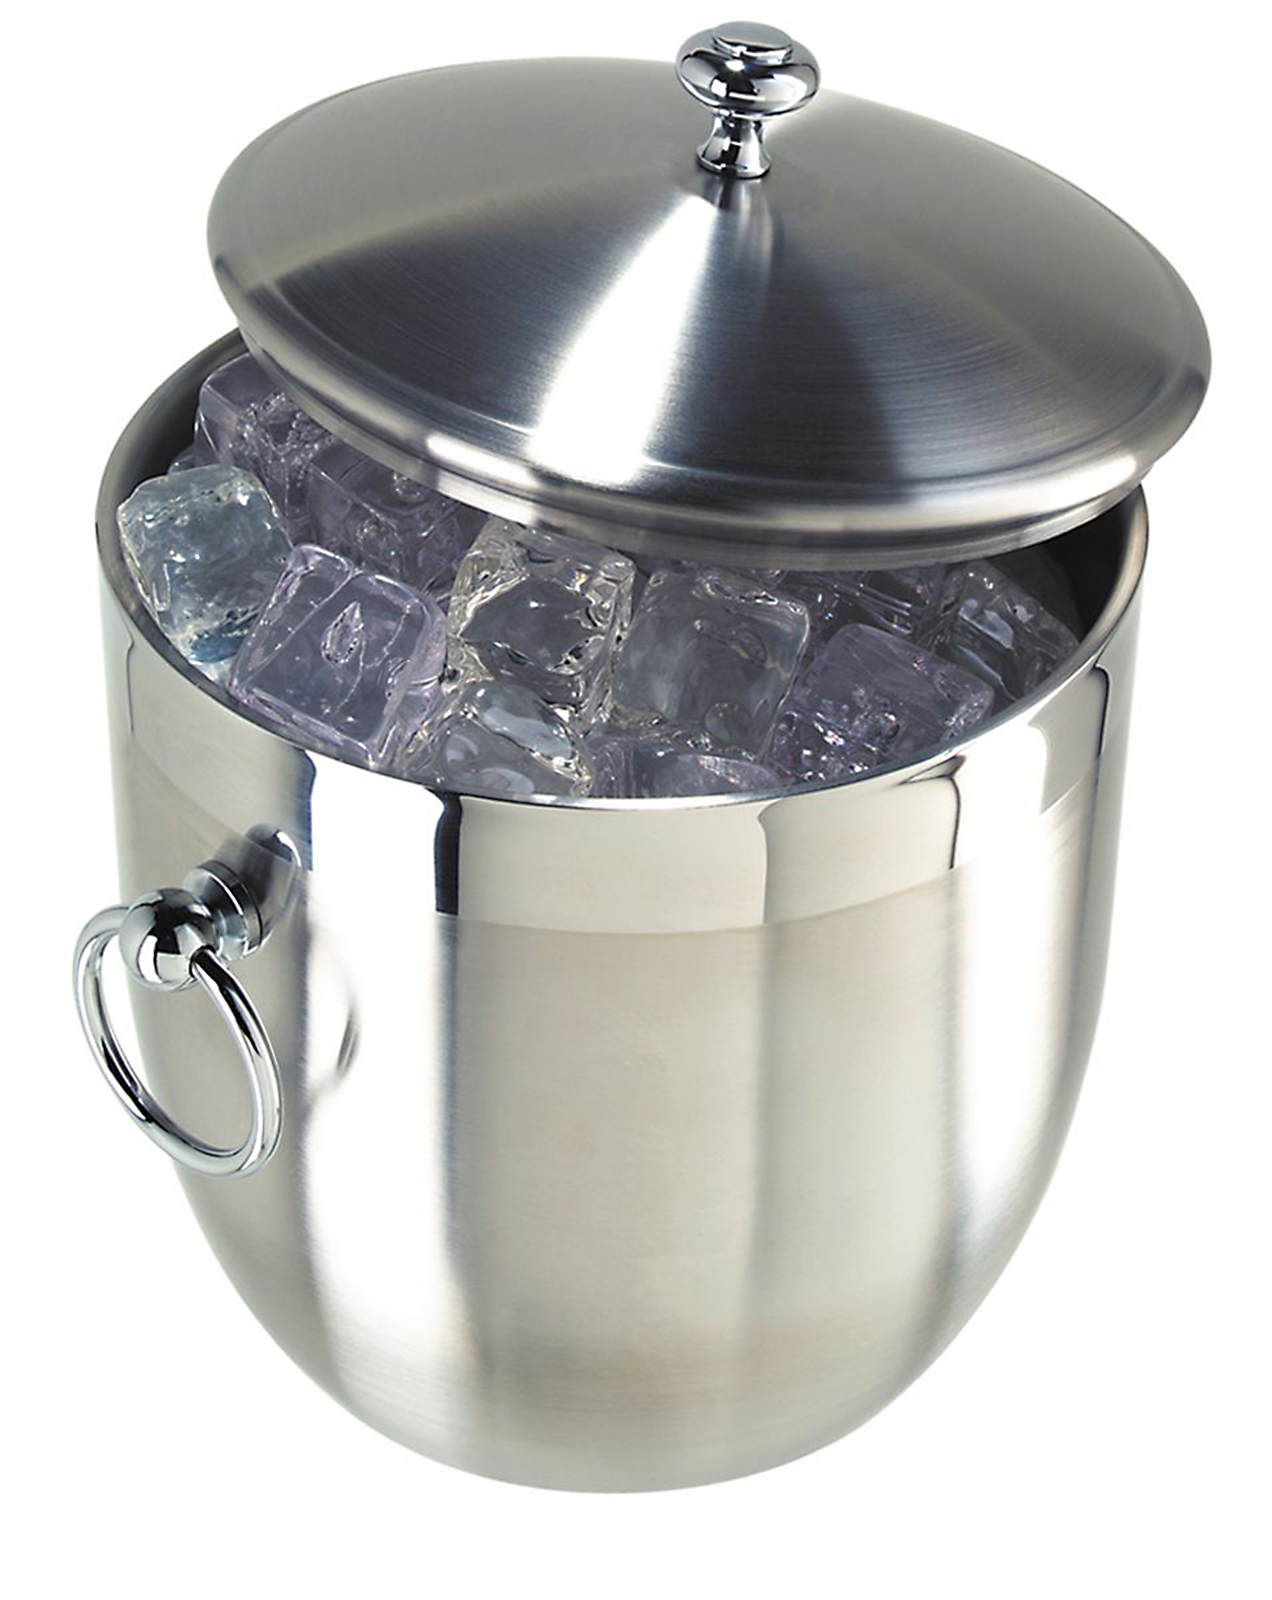 Wish for Joy 7044 3 qt. Ice Bucket - Stainless Steel